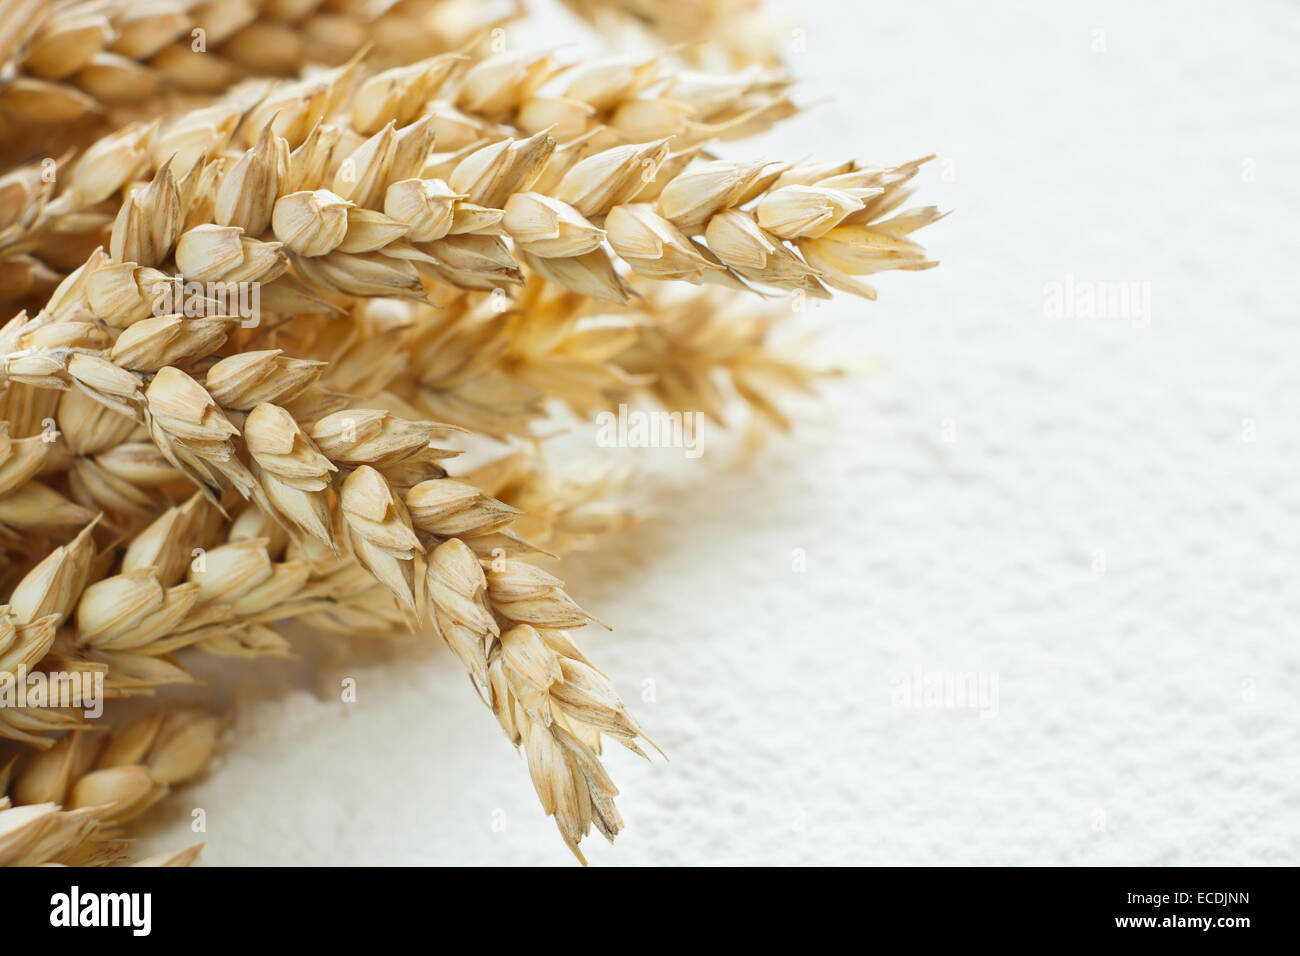 Scattered wheat flour on table as background and wheat spike Stock Photo